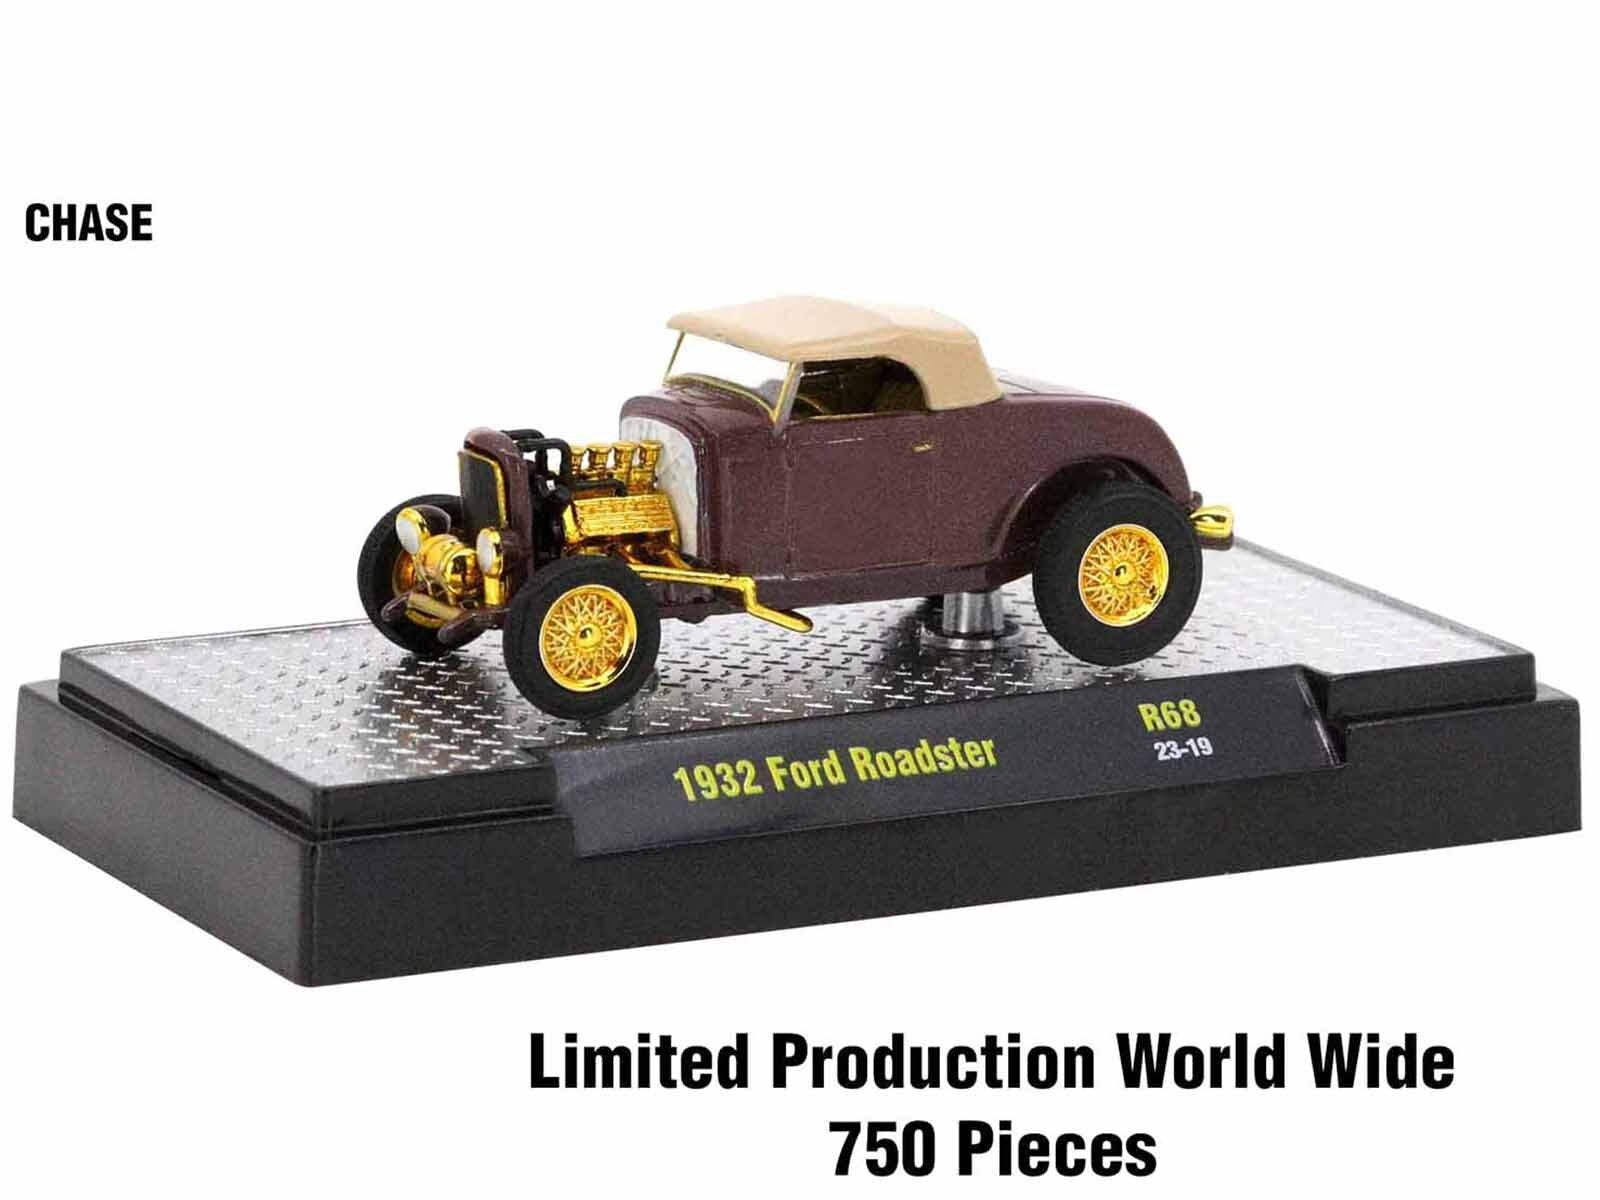 "Auto Meets" Set of 6 Cars IN DISPLAY CASES Release 68 Limited Edition 1/64 Diecast Model Cars by M2 Machines